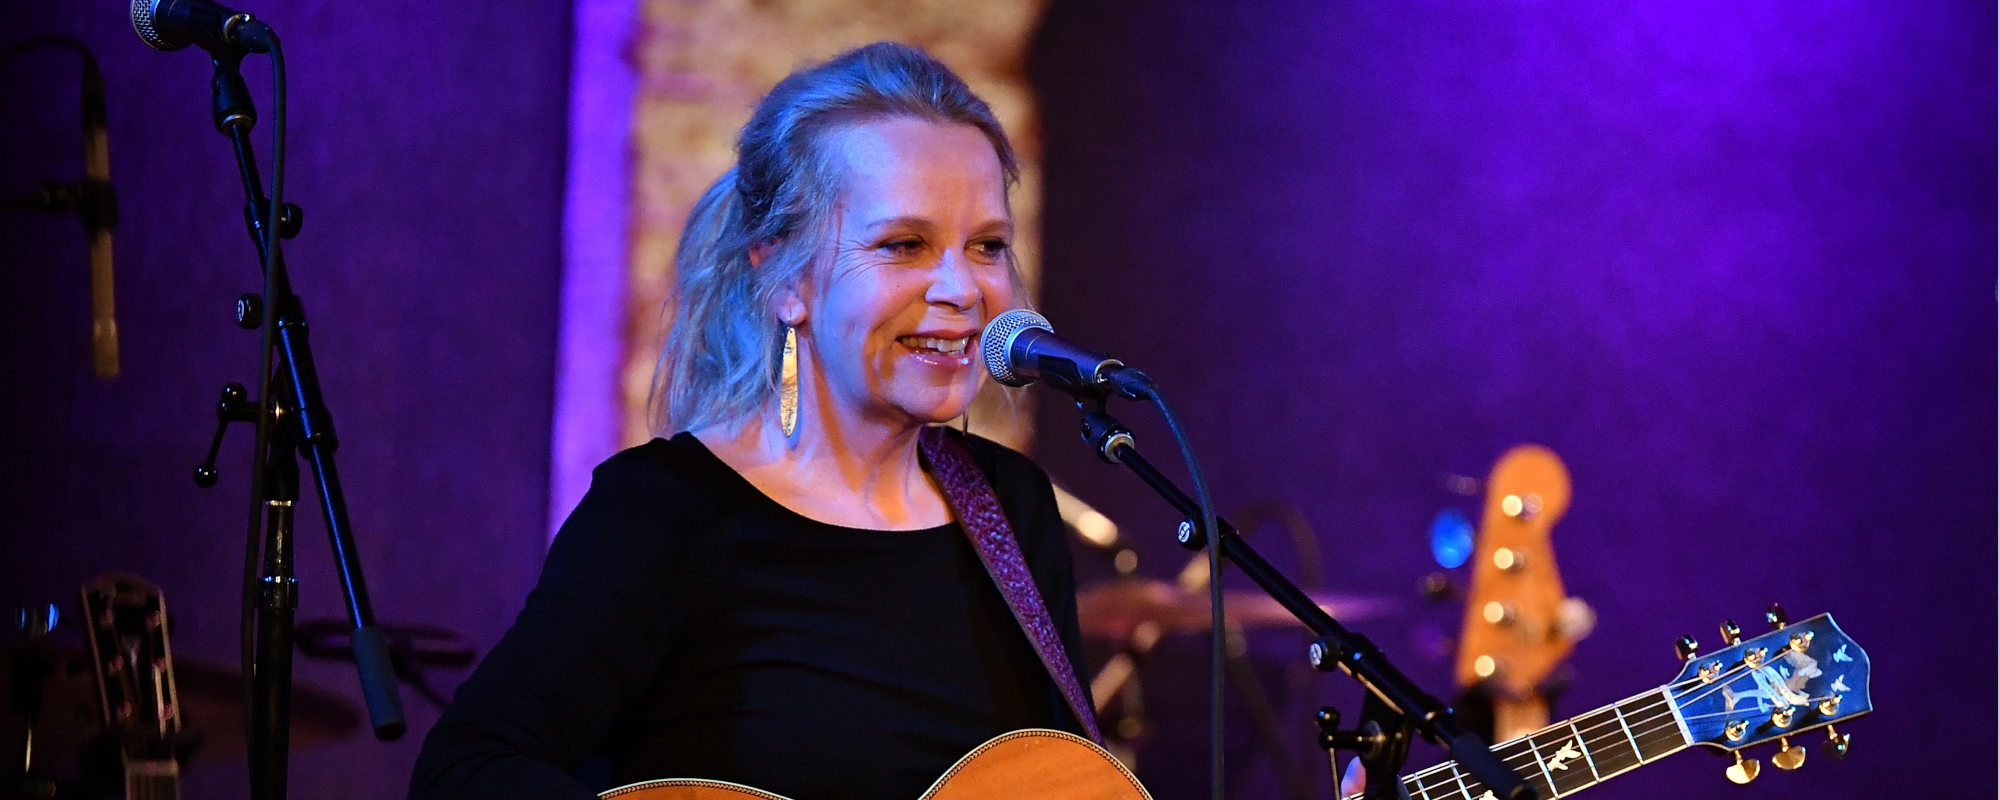 Who Wrote “Shut Up and Kiss Me” By Mary Chapin Carpenter?